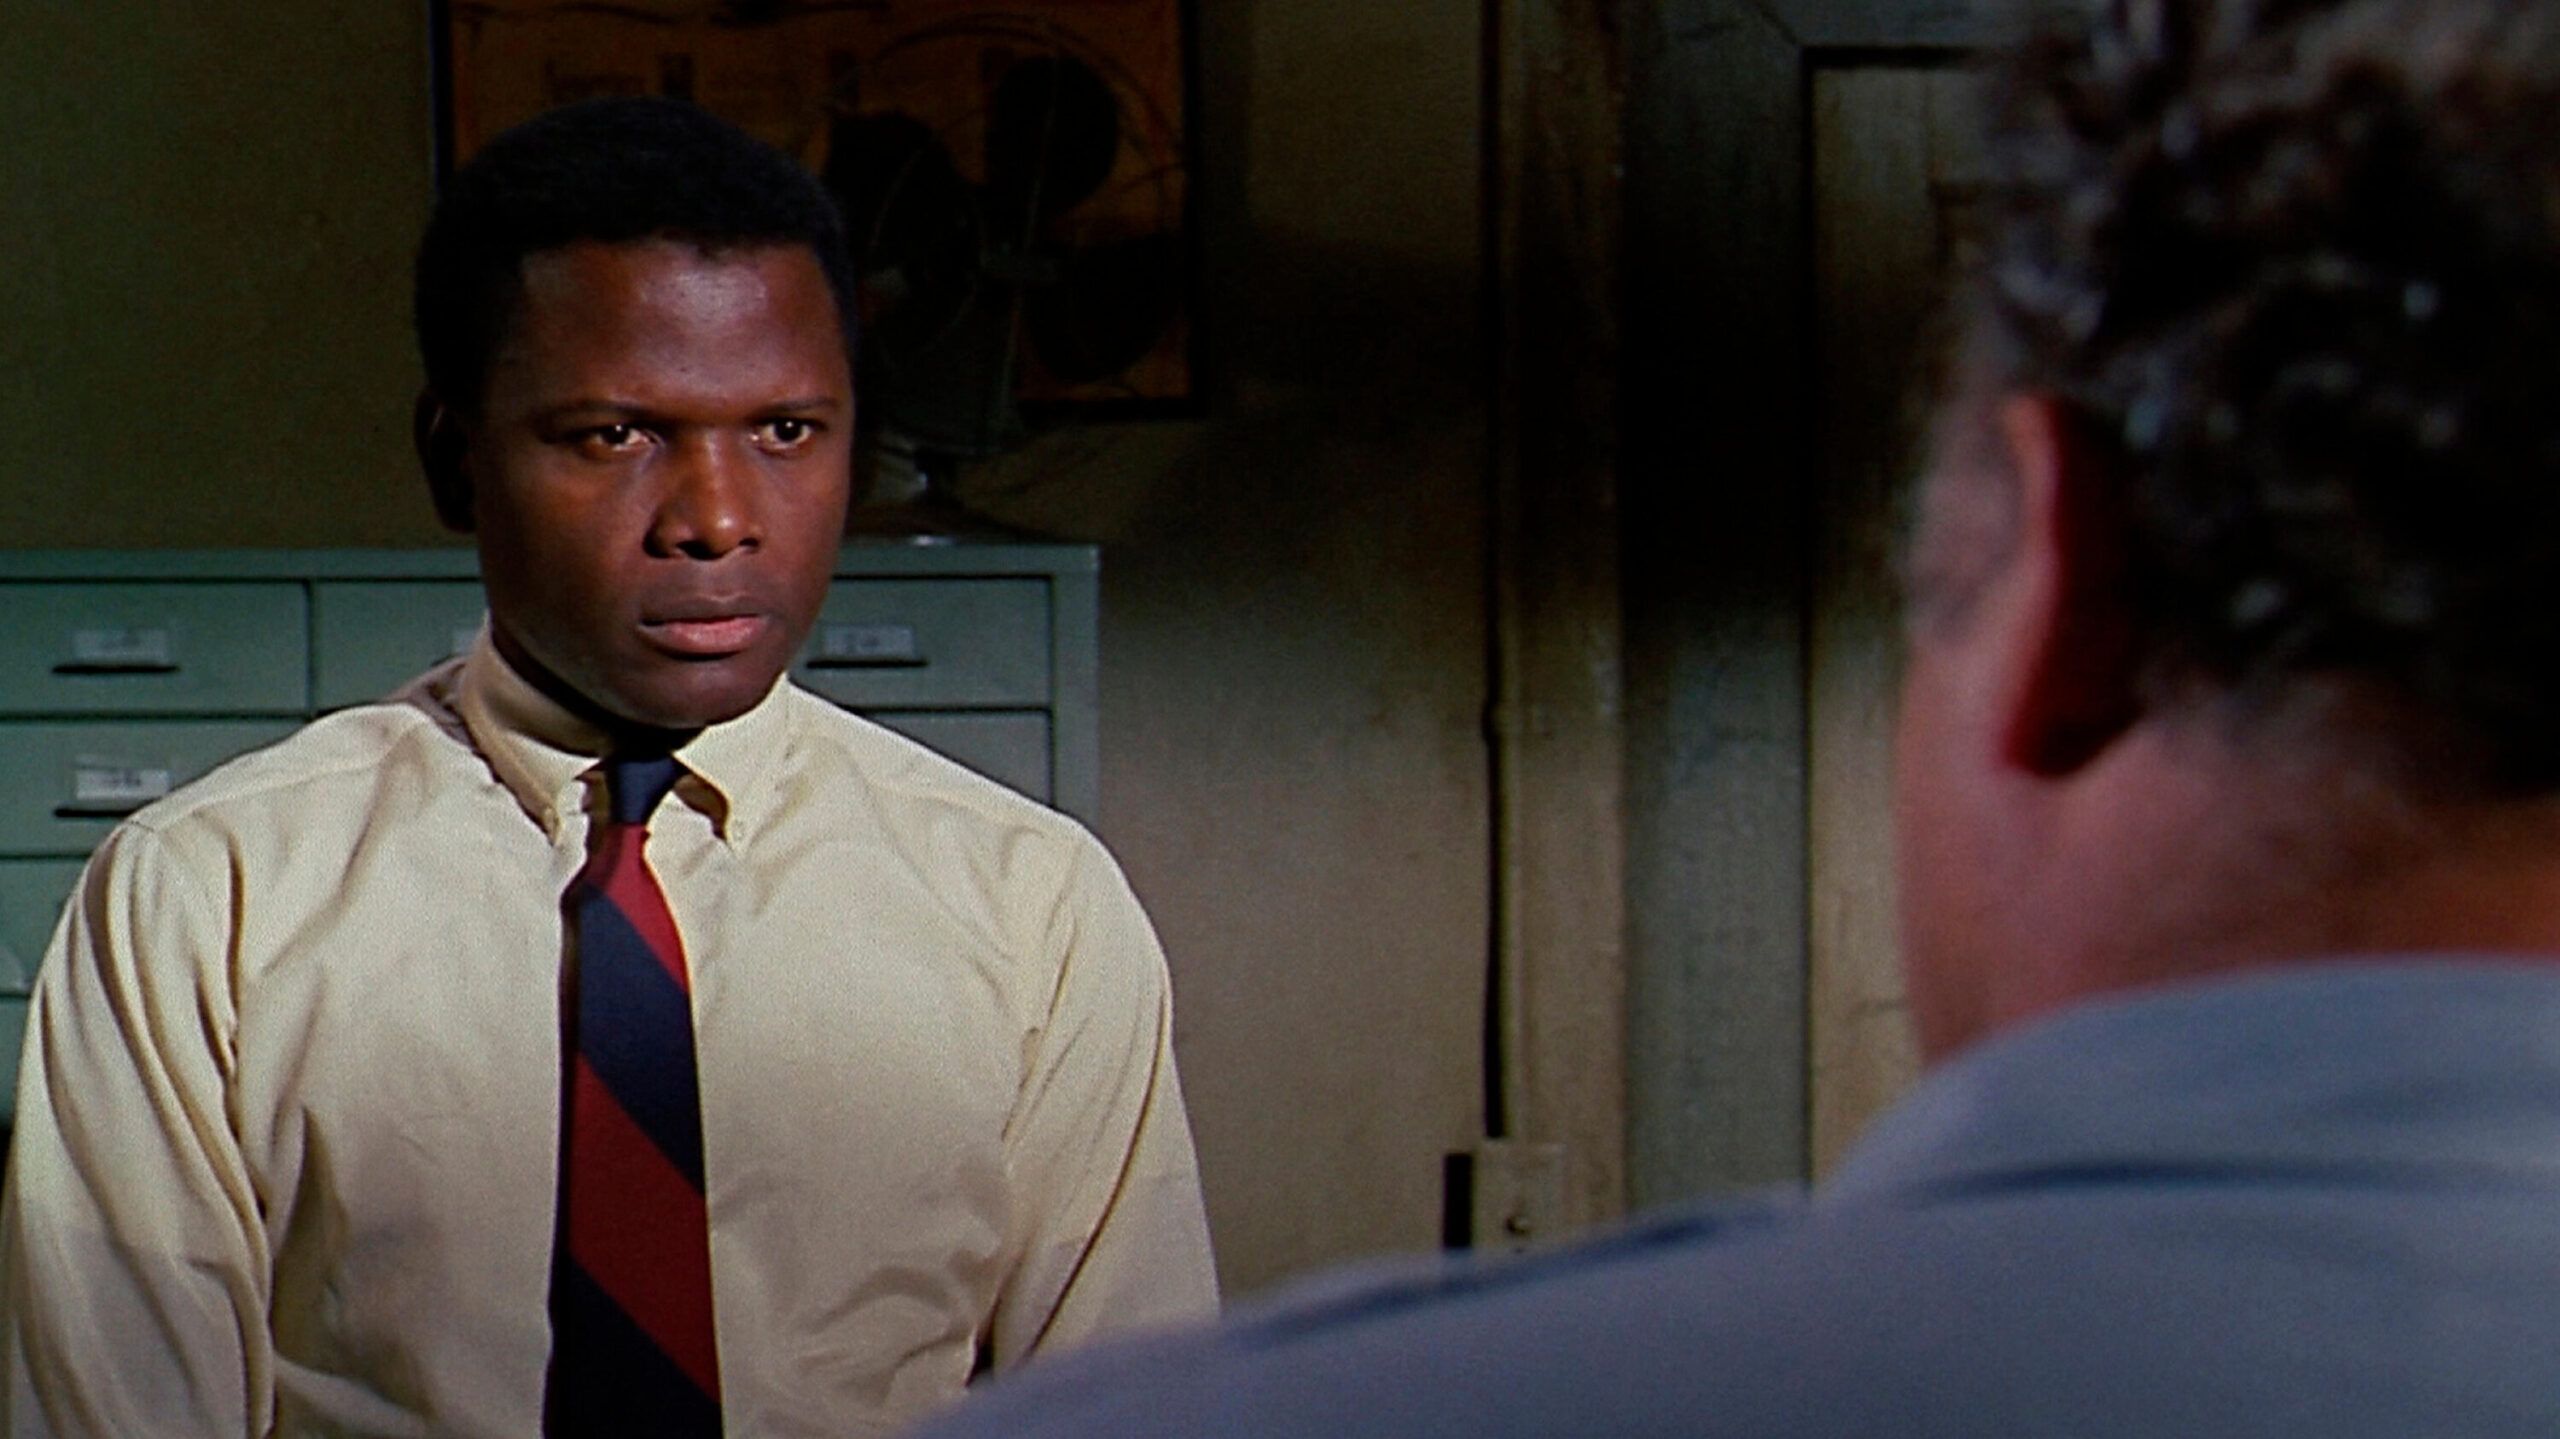 Sidney Poitier as Mr. TIbbs from a scene in the movie In the Heat of the Night